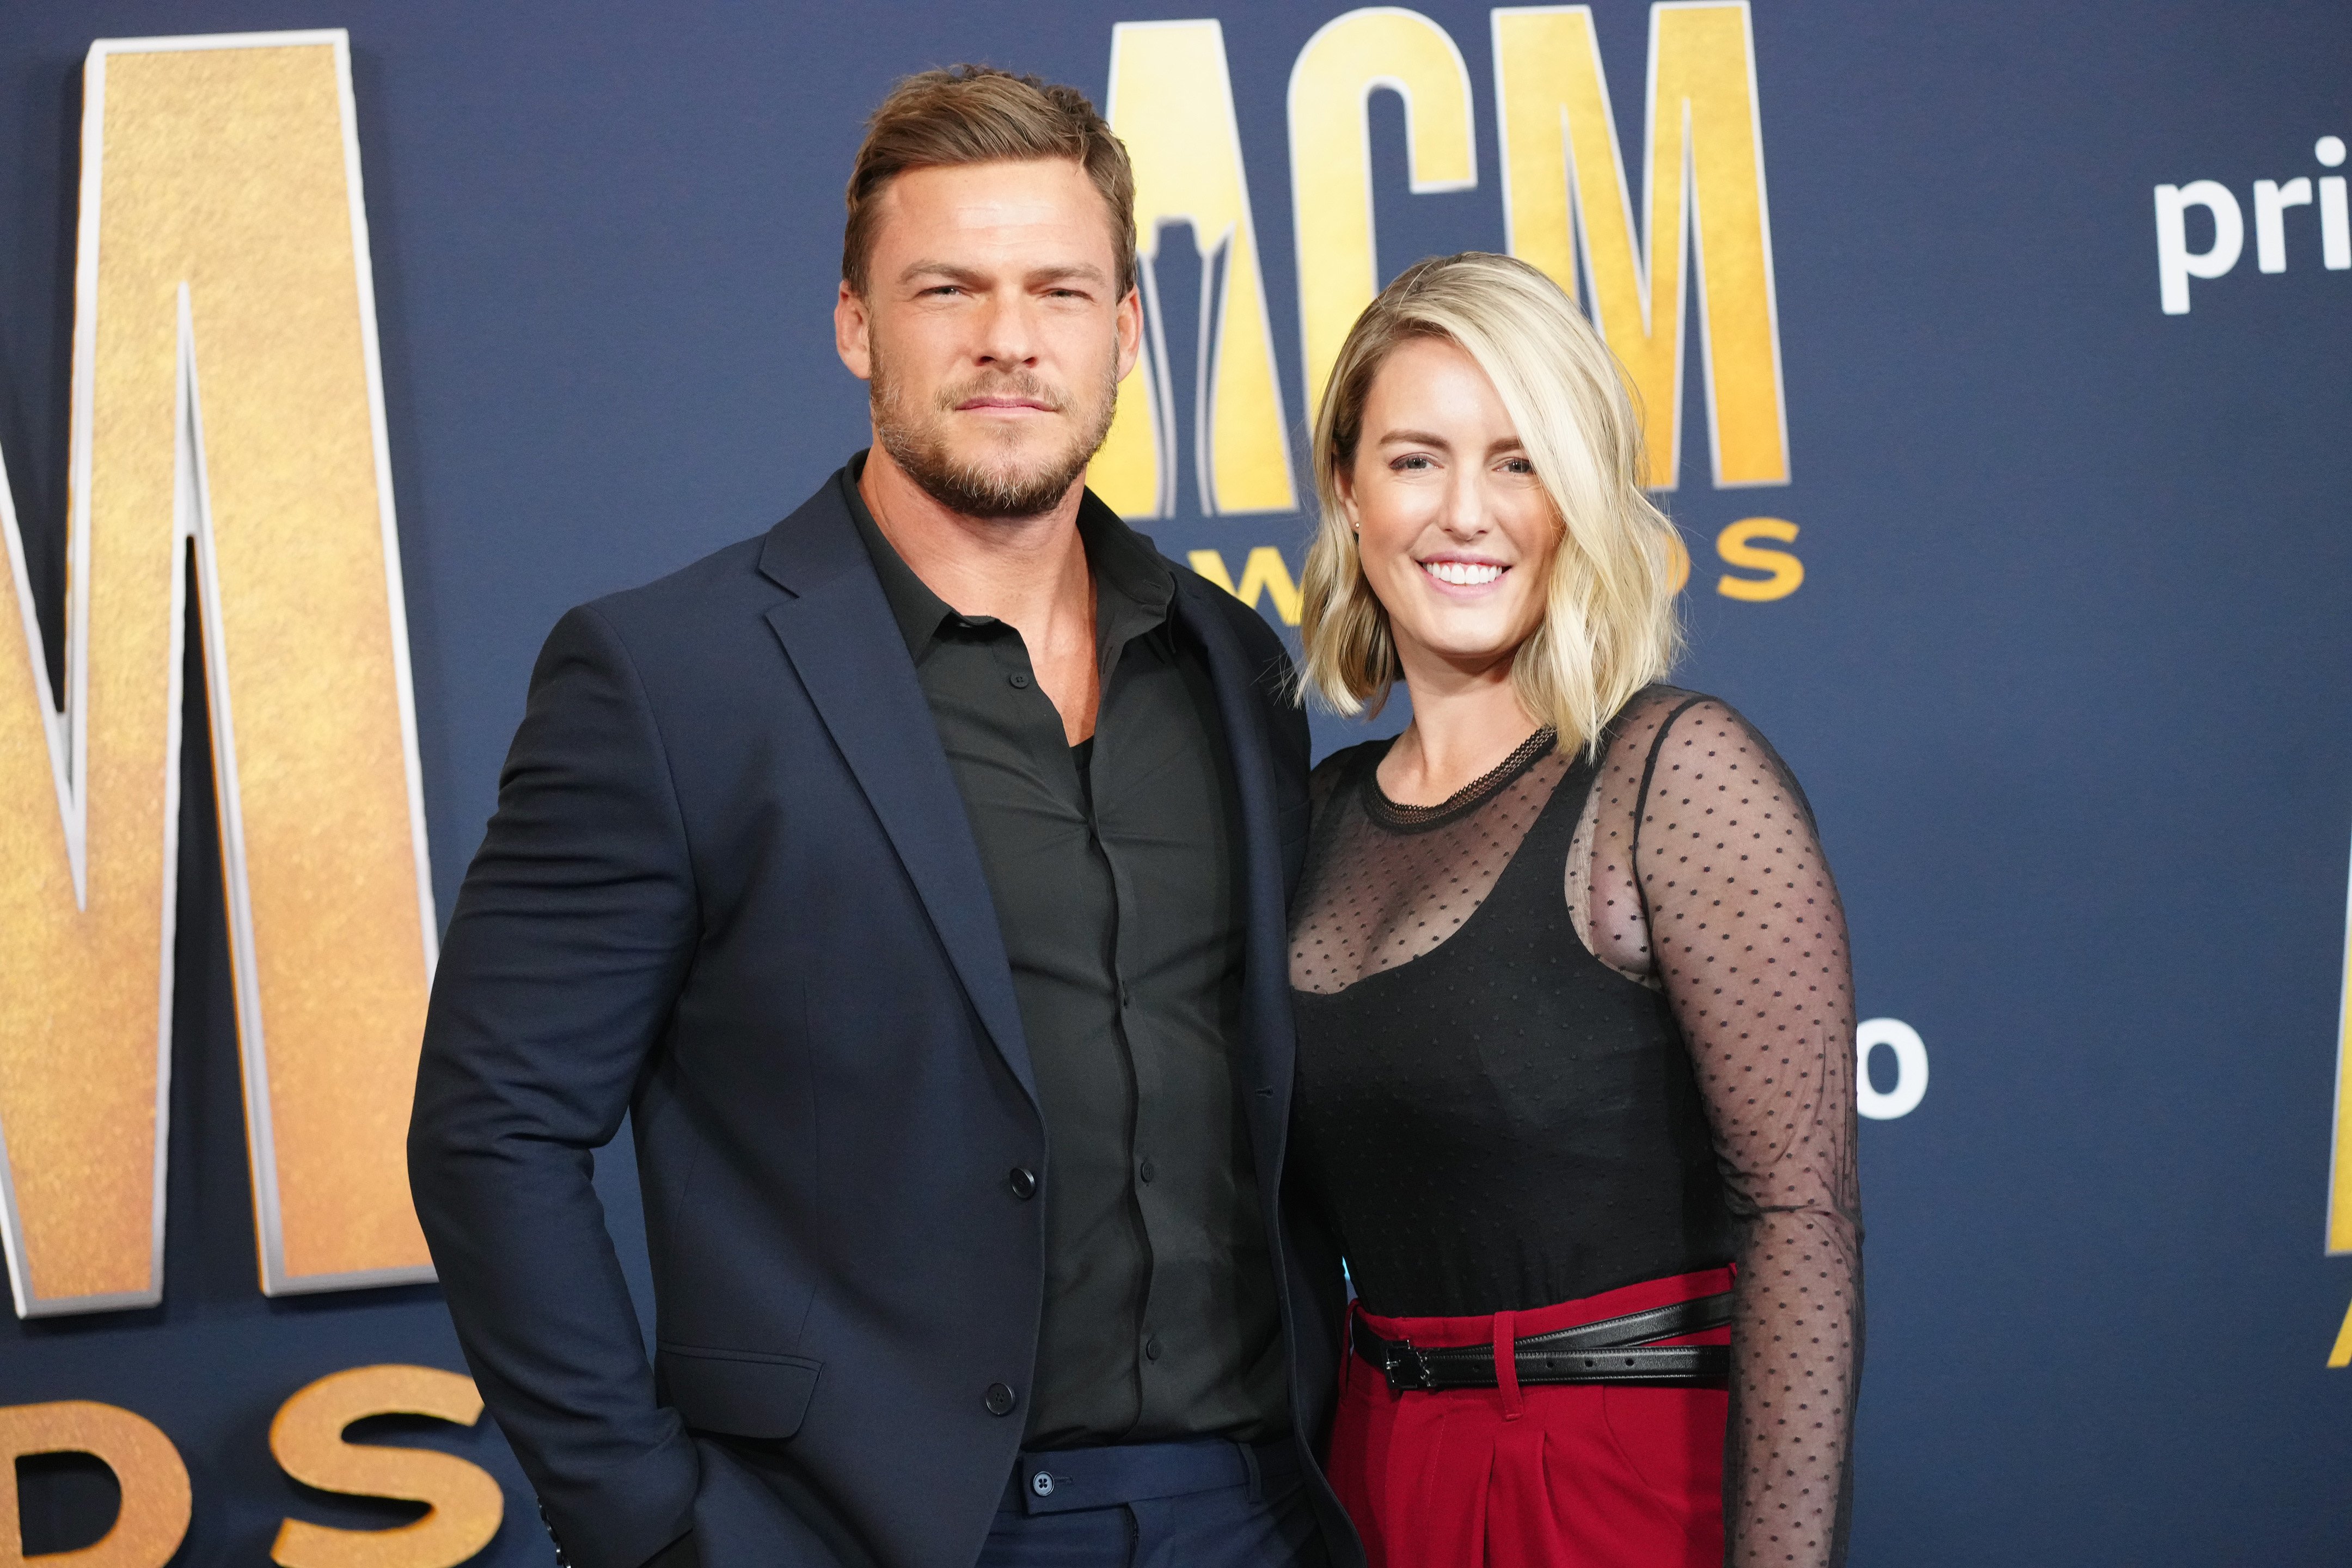 Catherine Ritchson and Alan Ritchson attend the 57th Academy of Country Music Awards at Allegiant Stadium, on March 7, 2022, in Las Vegas, Nevada. | Source: Getty Images